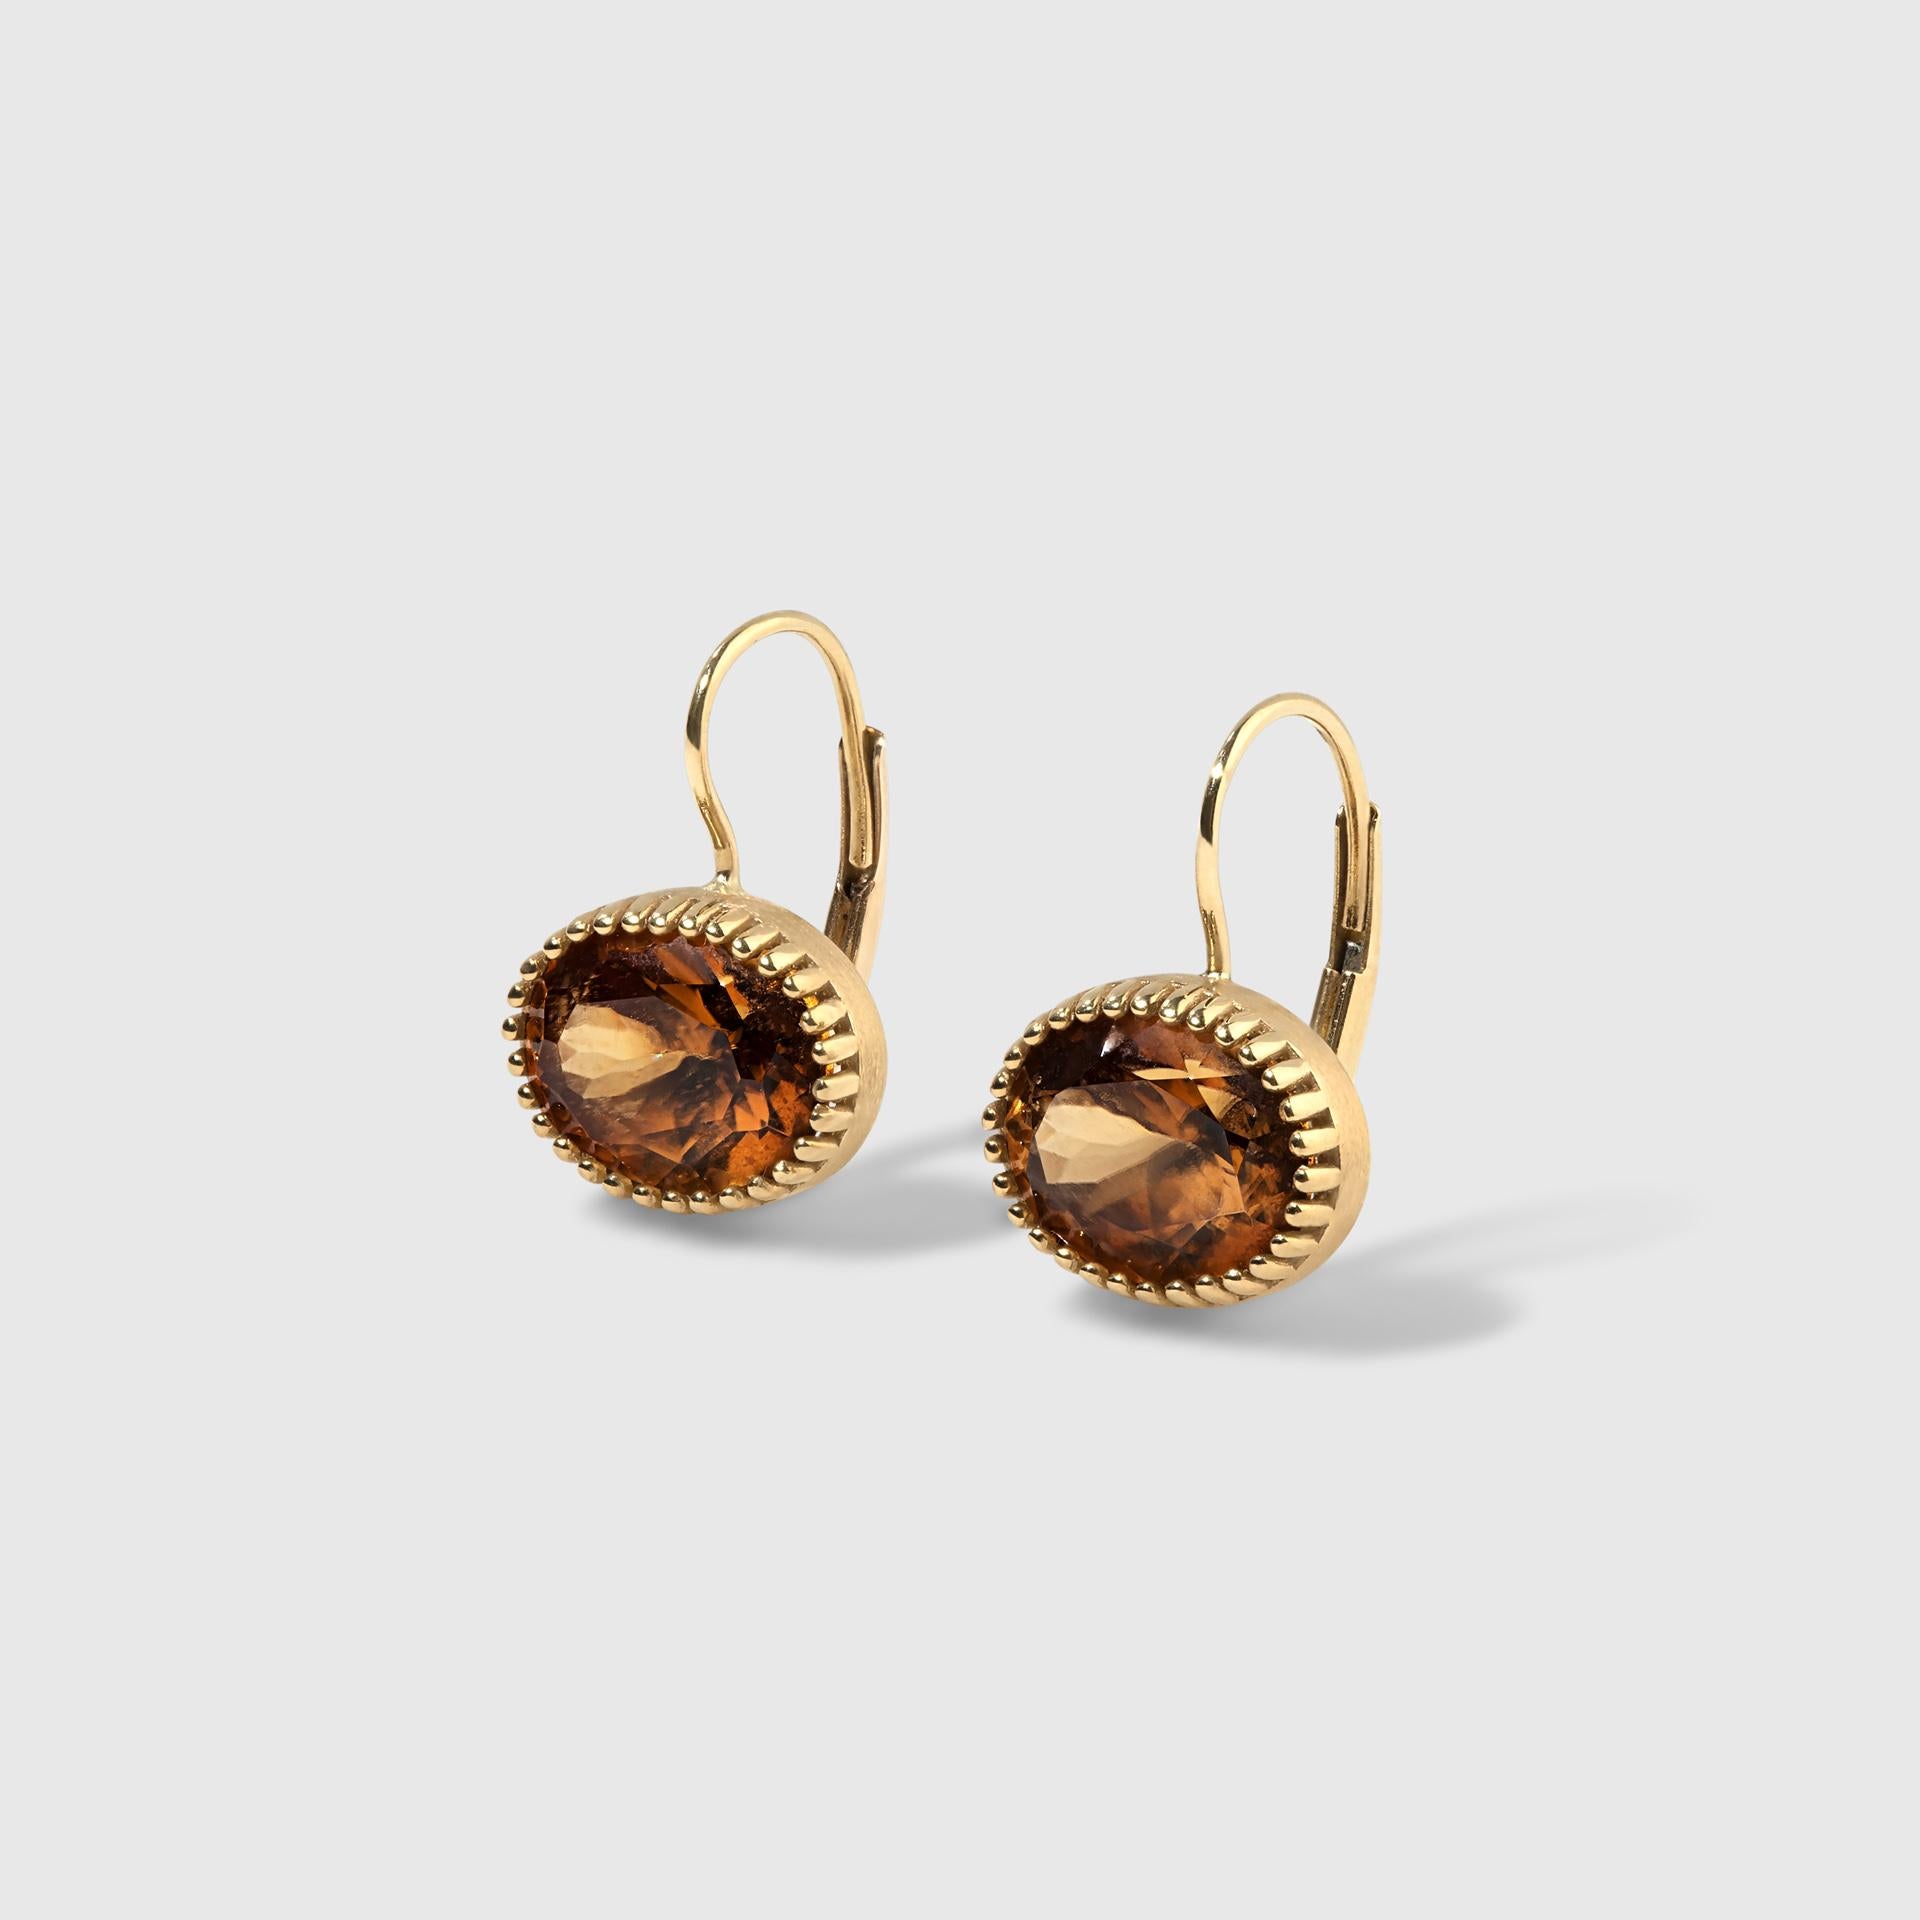 Oval Cut Oval Cognac Zircon Earrings, 18kt Gold by Ashley Childs, Contemporary Jewelry For Sale